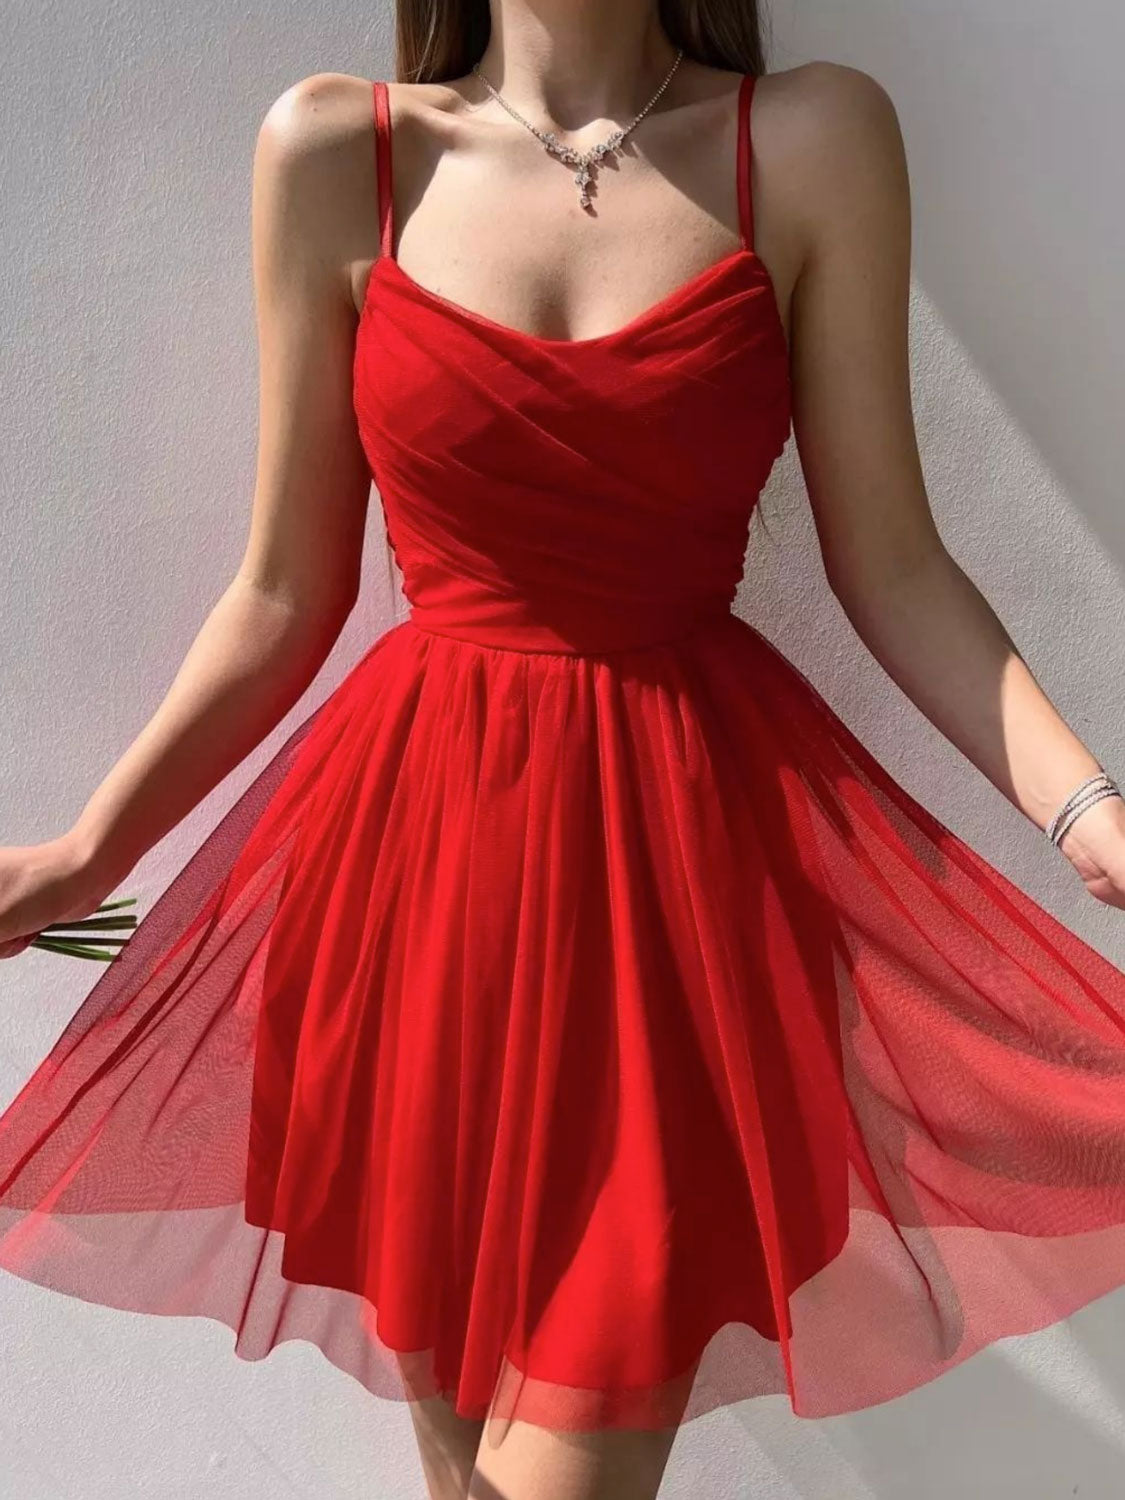 Red Formal Evening Gowns, Short Party Dresses in Red